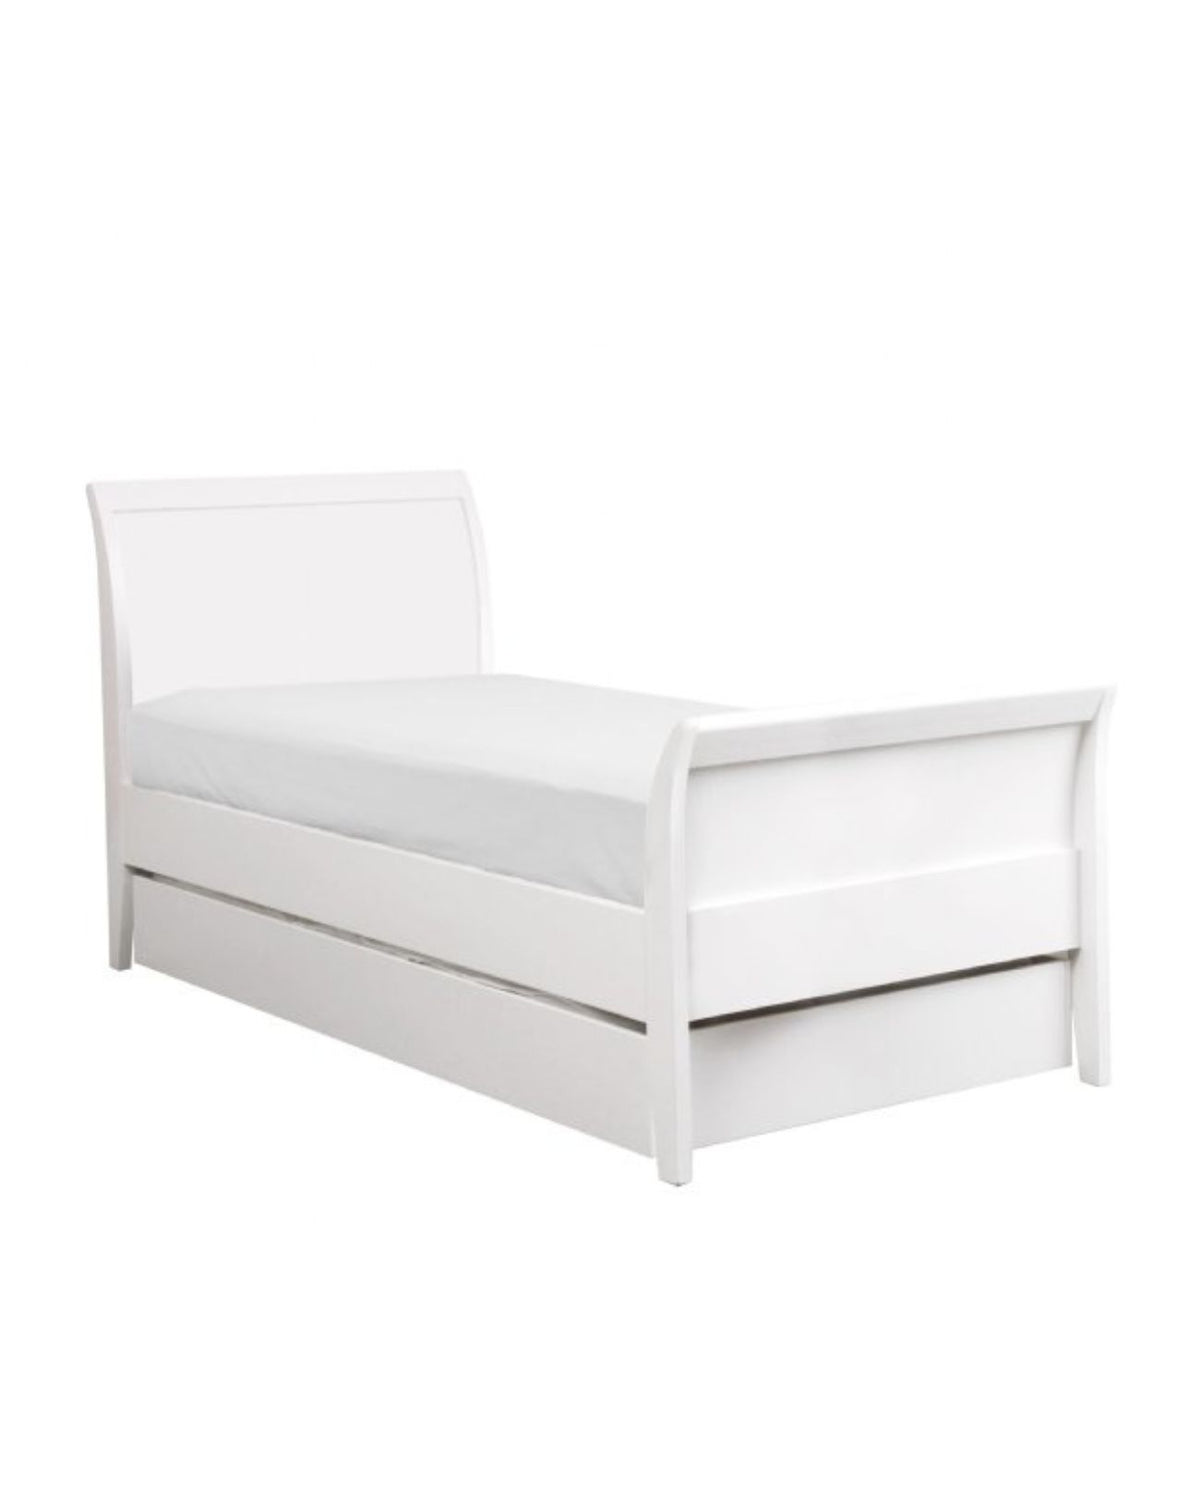 SWEETHEART BED | DISCONTINUED